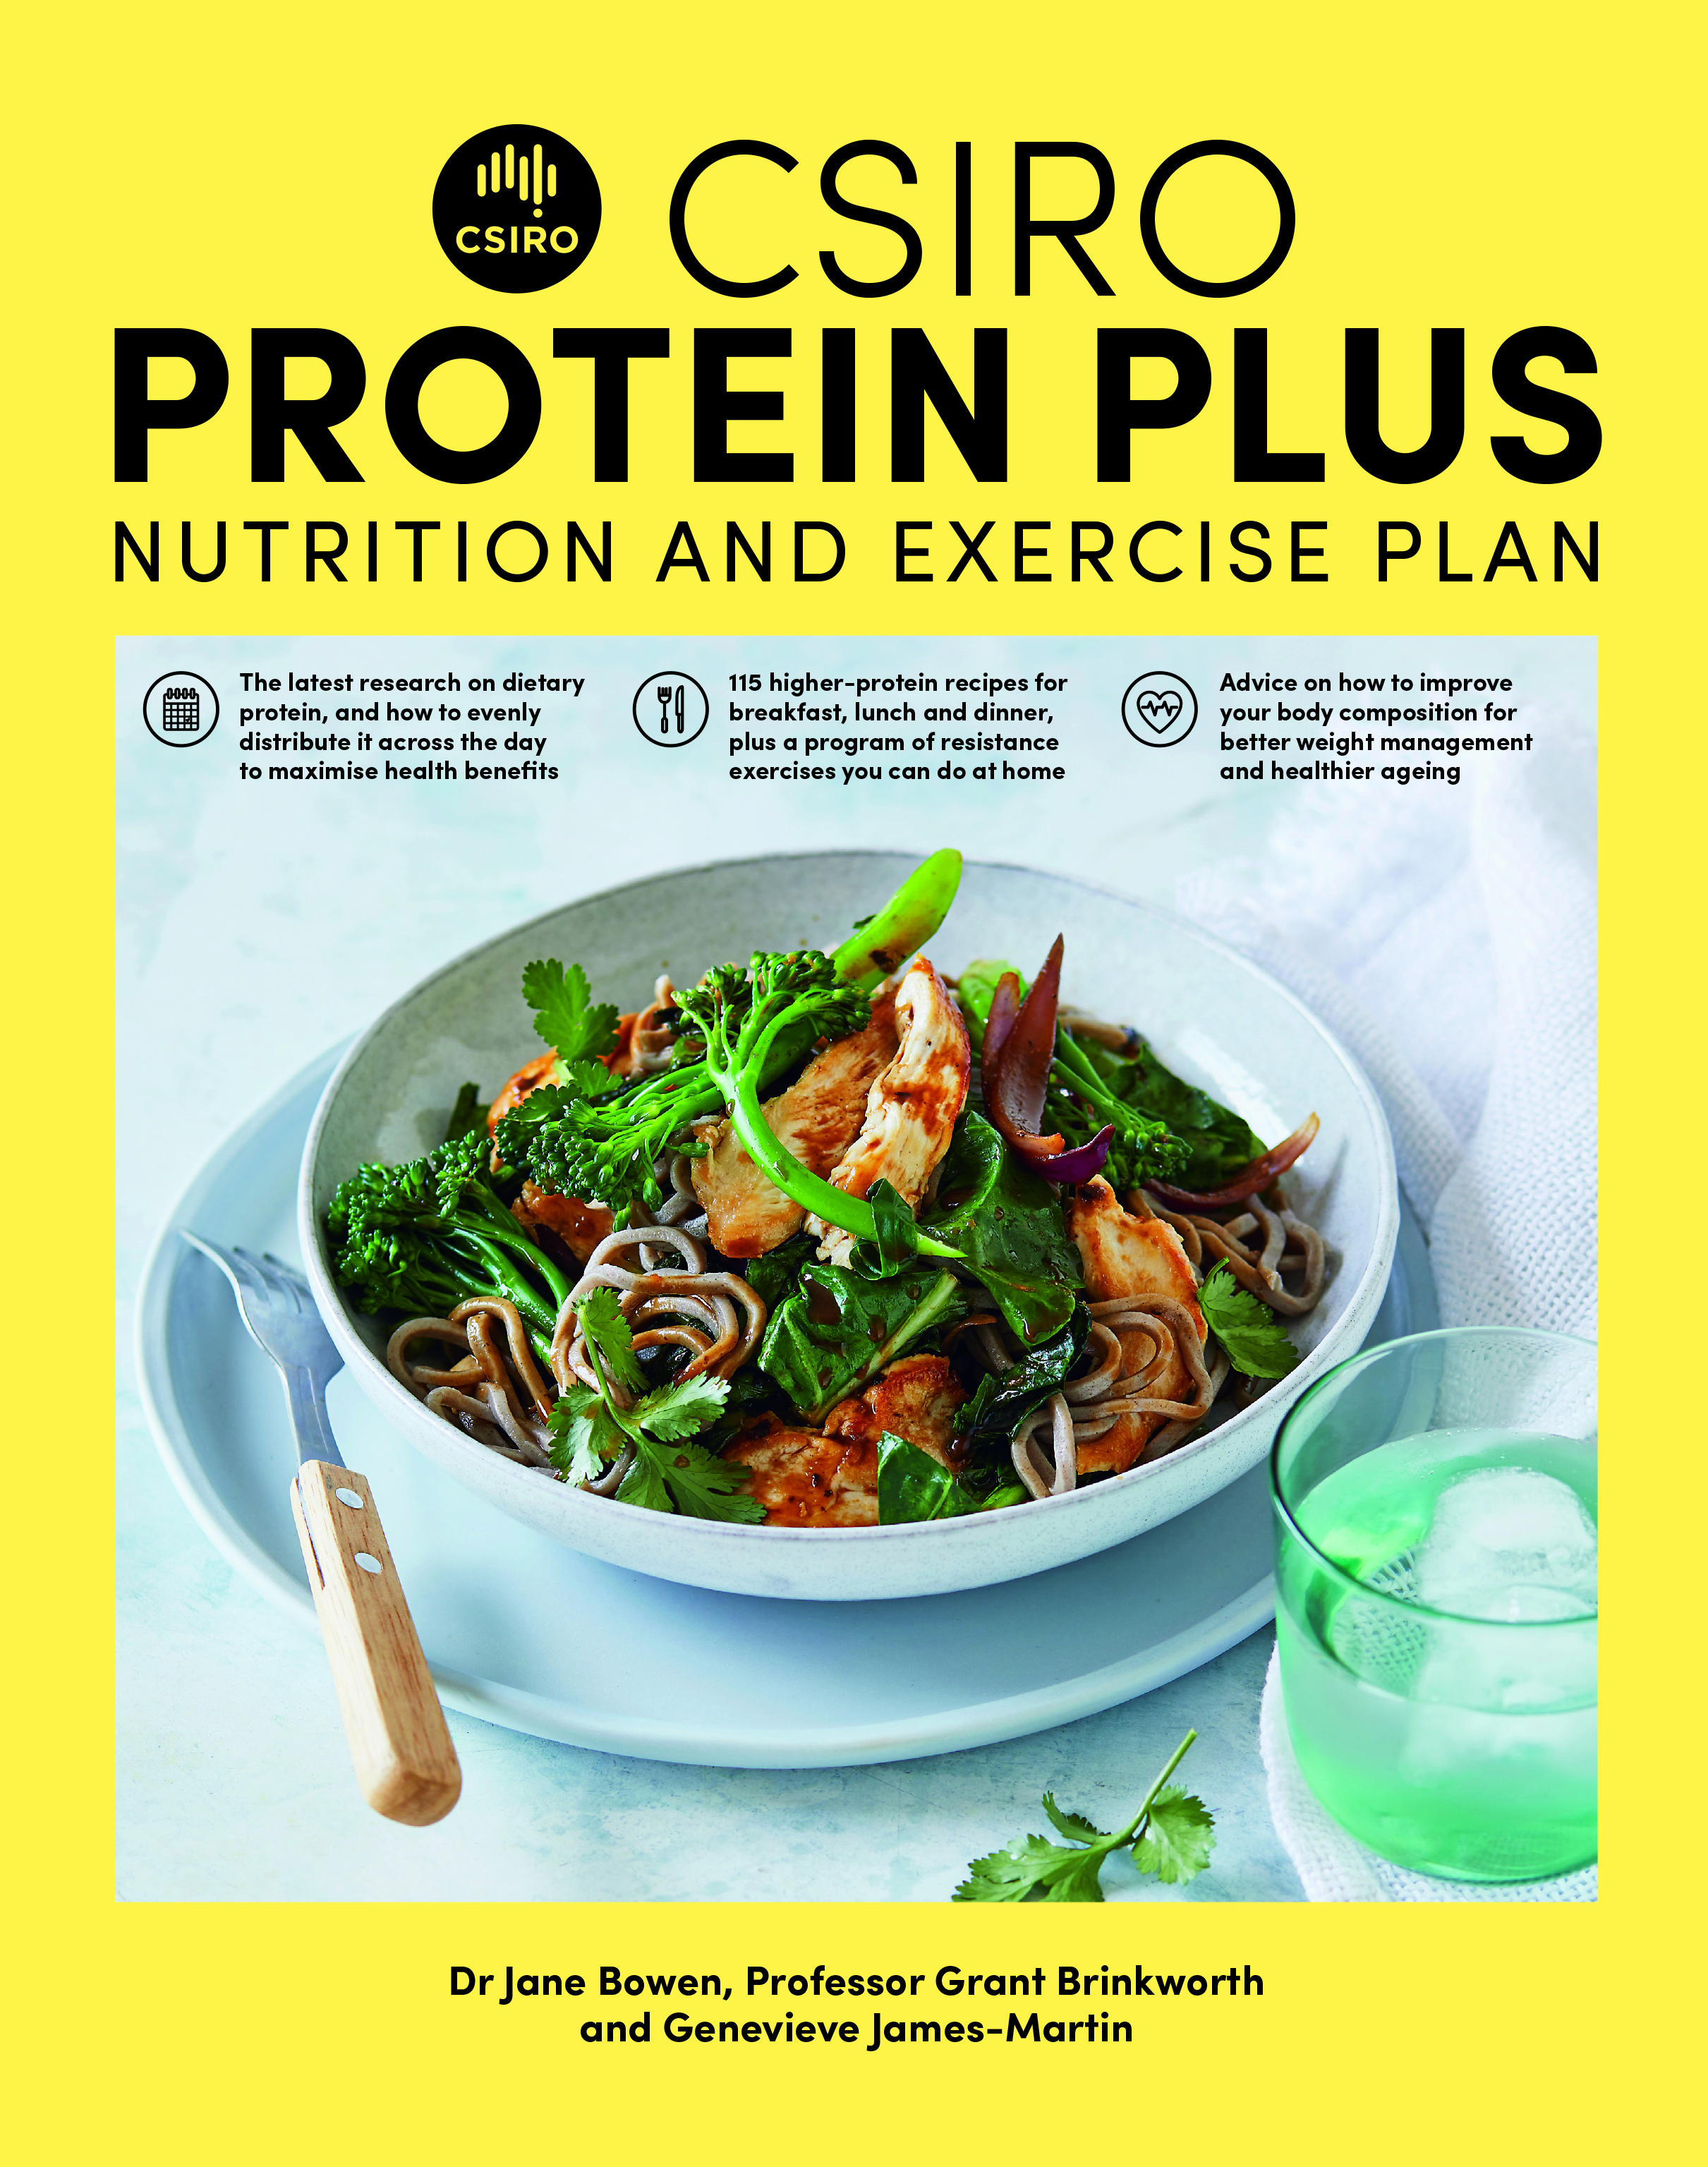 Front cover of the CSIRO Protein Plus Nutrition and Exercise Plan book with book title and an image of some recipes